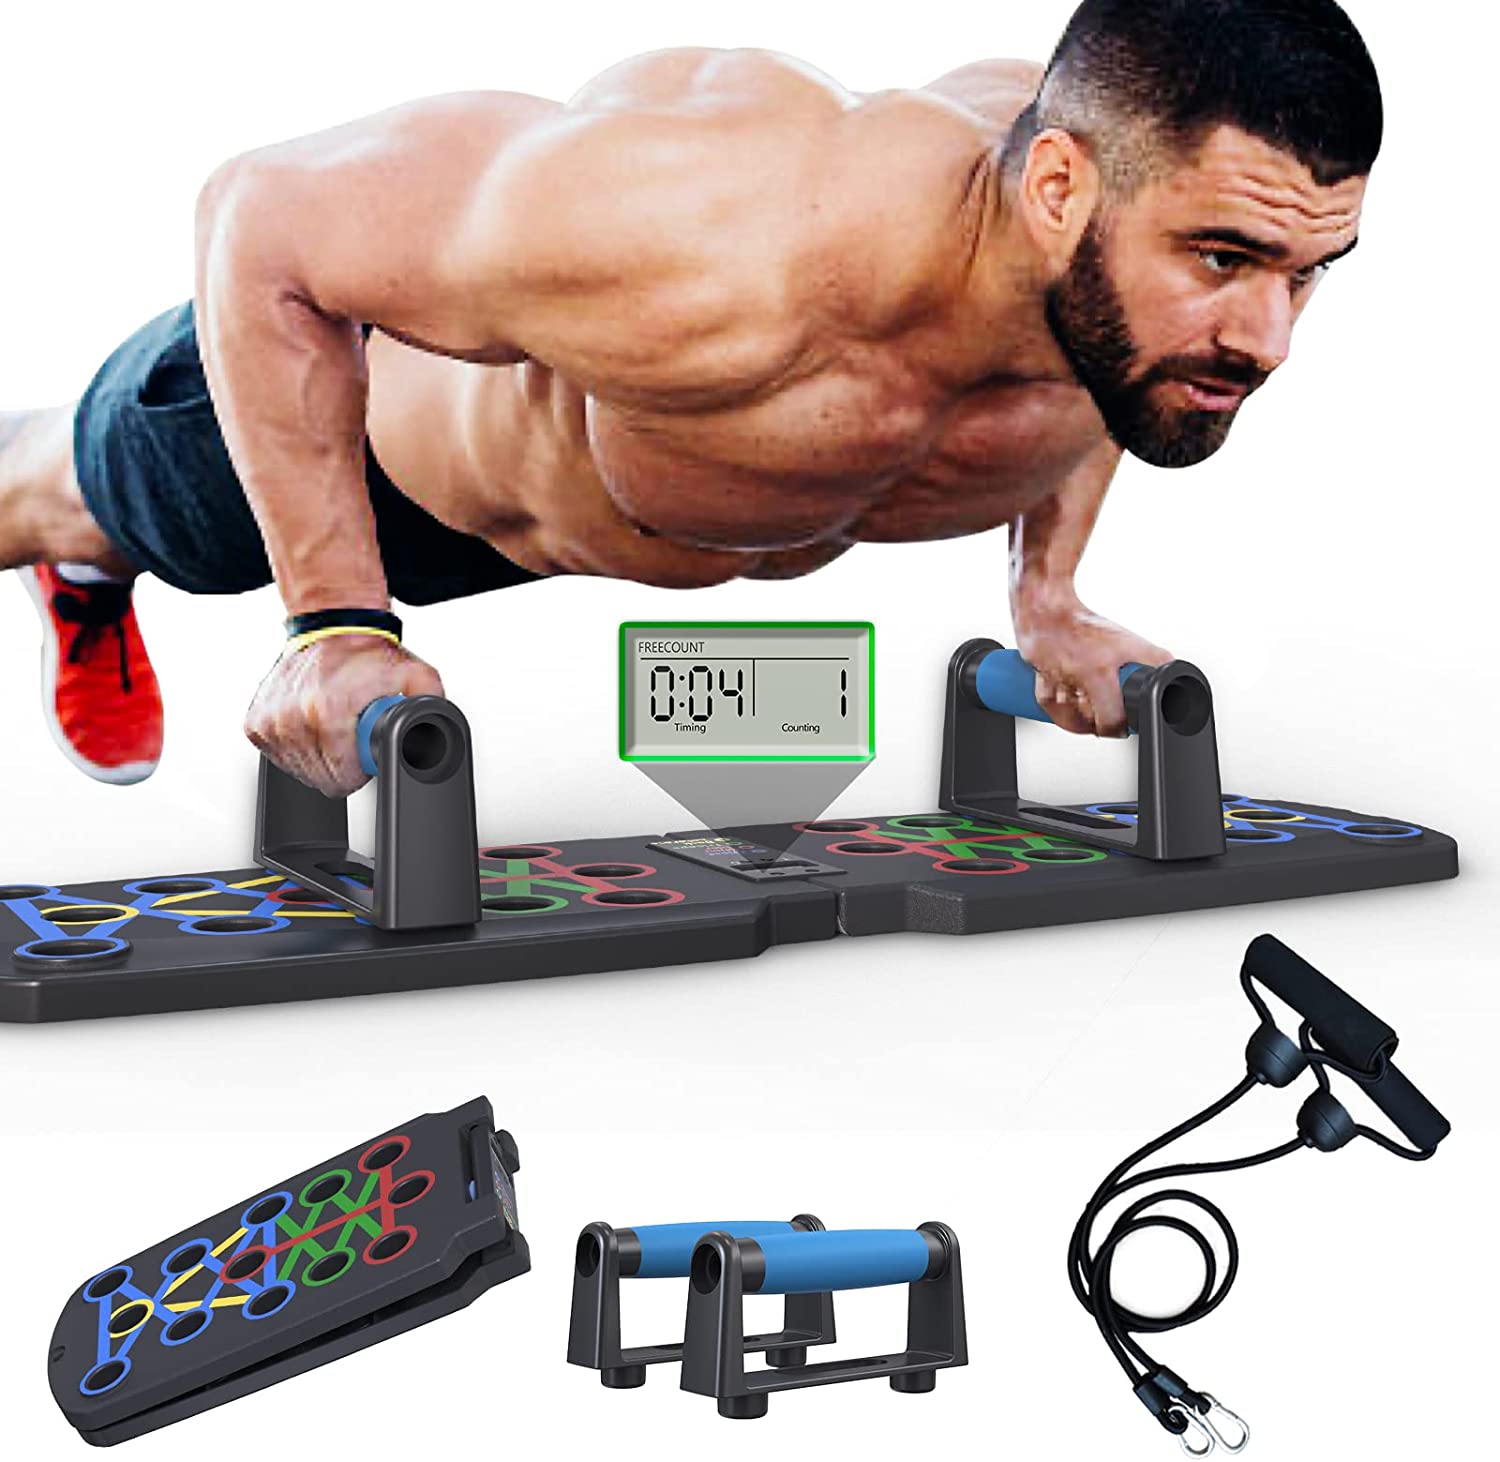  Power Press Push Up Board Value Bundle - Push Up Bar Workout  Gear with Resistance Bands and Jump Rope, calisthenics equipment pushup  board fitness, Work out equipment for home workouts